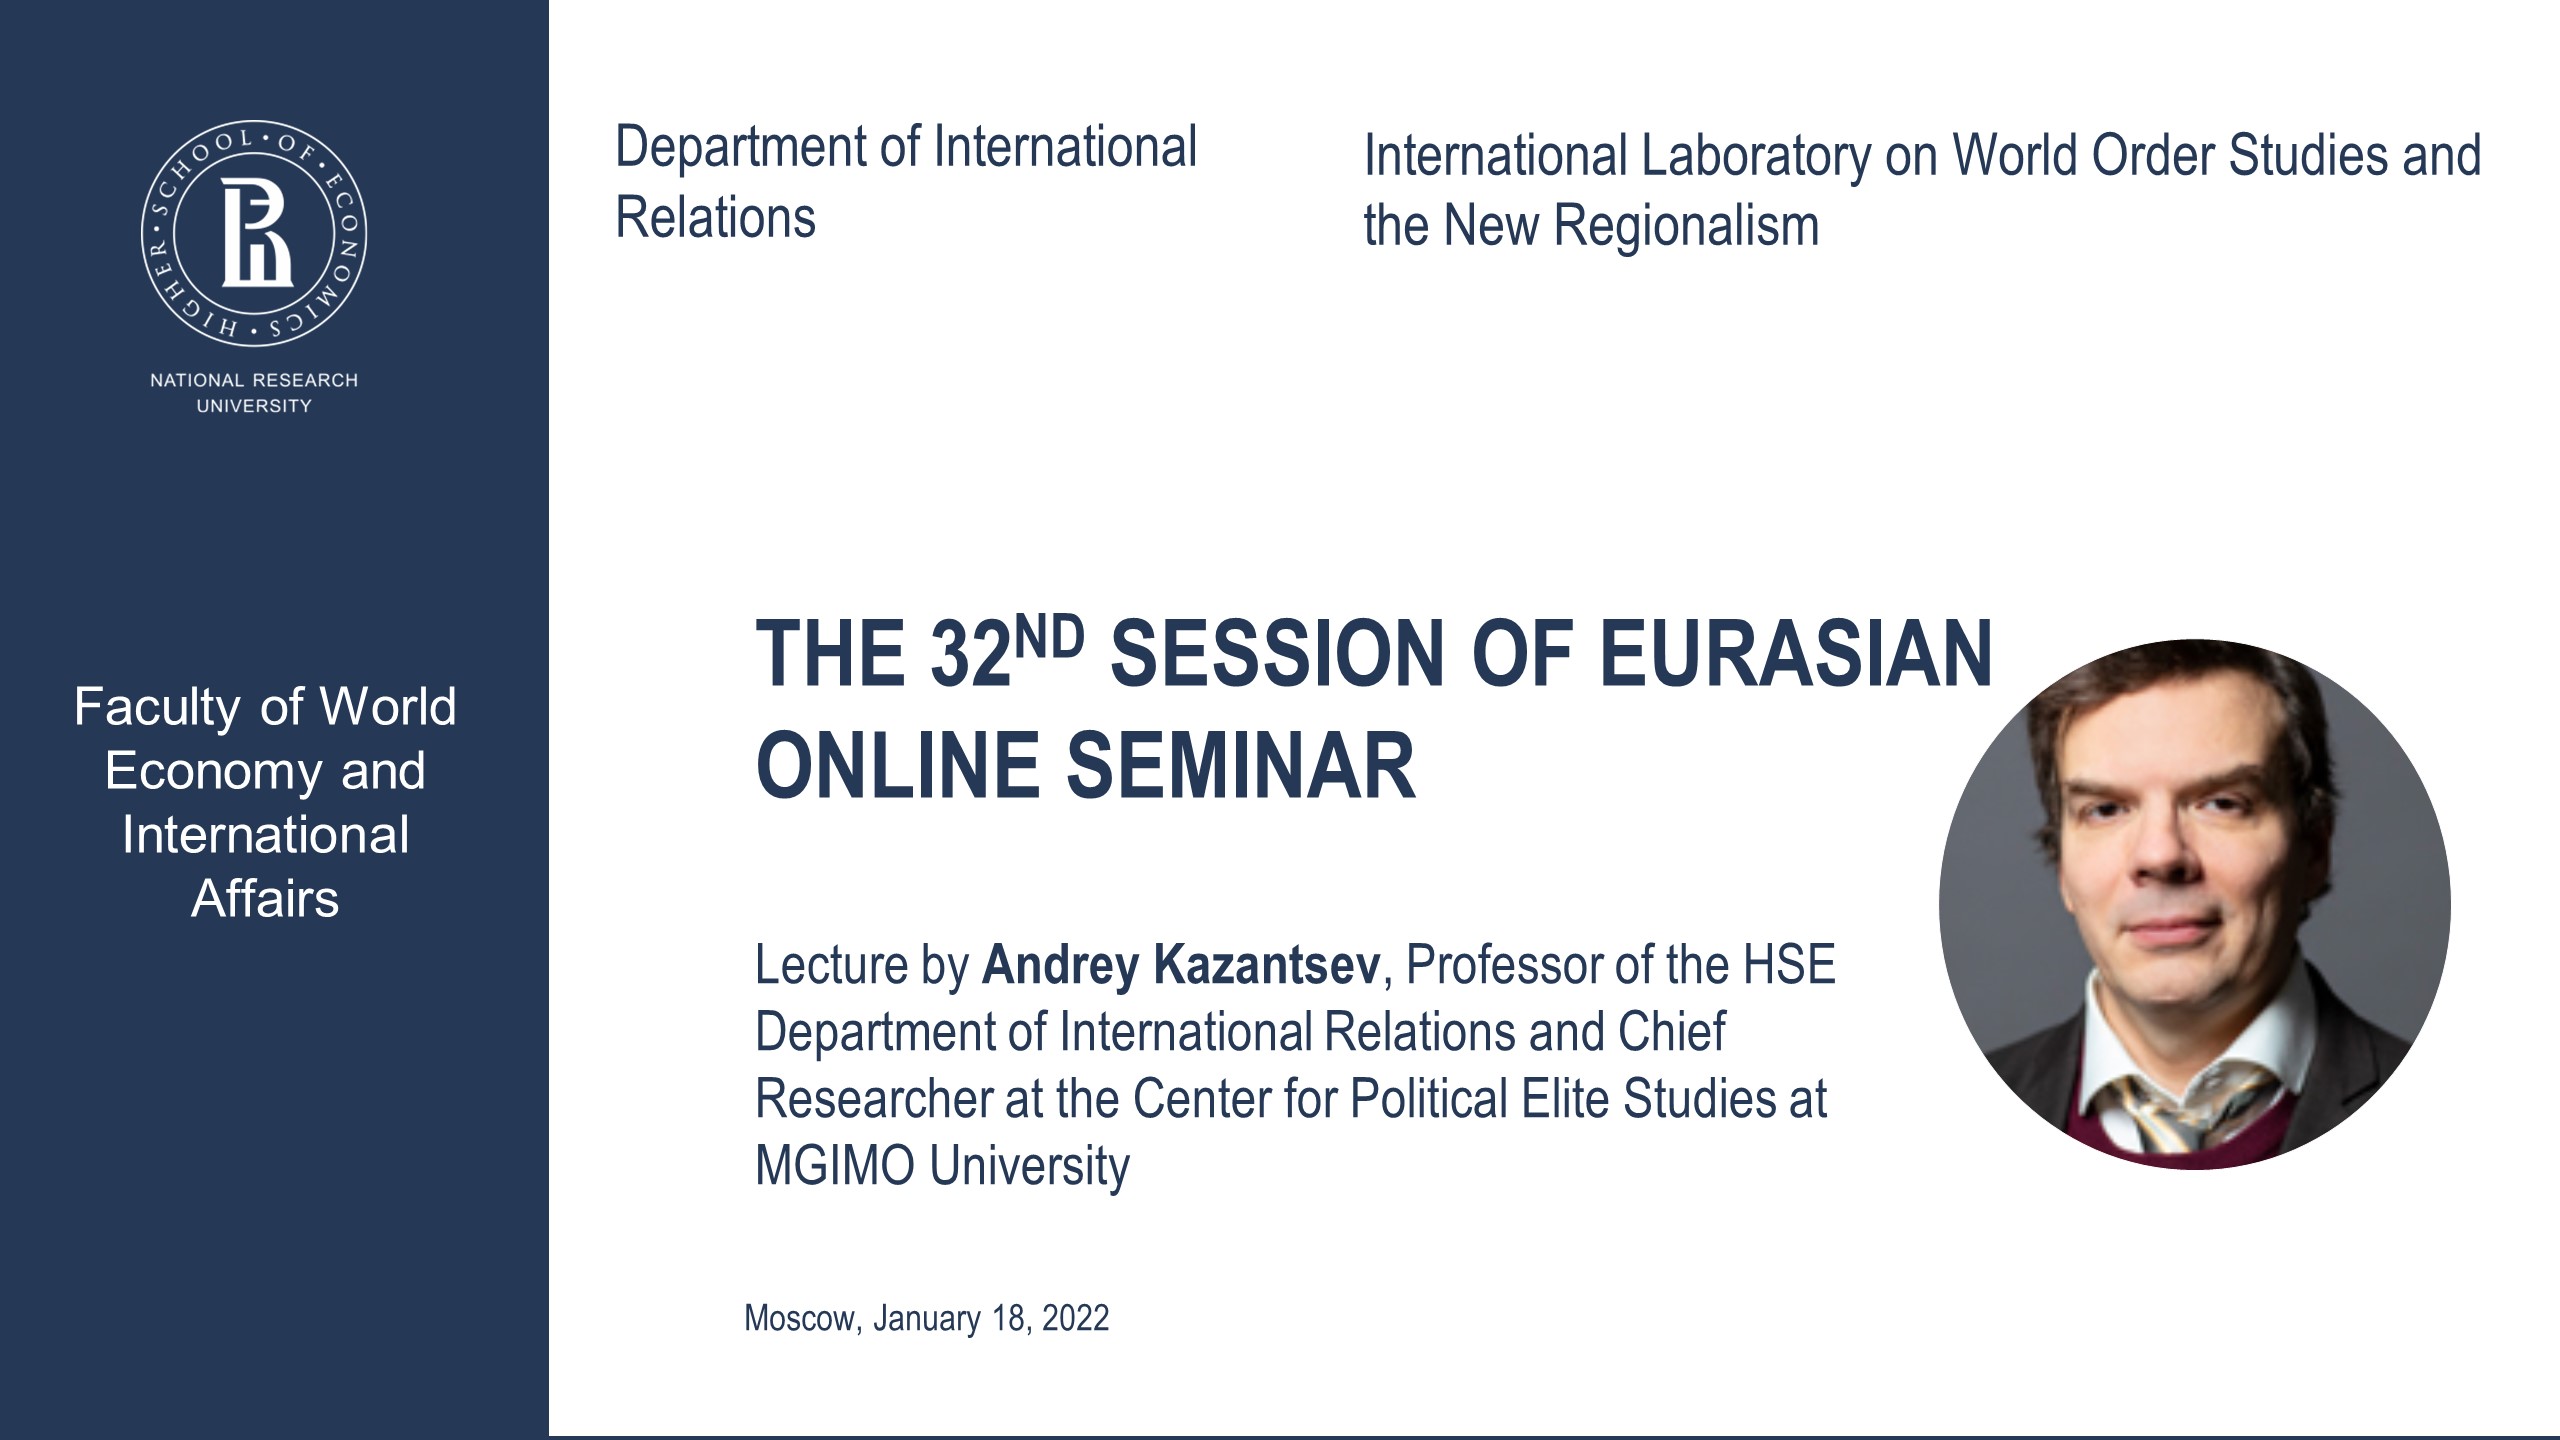 The 32 Session of Eurasian Online Seminar with Andrey Kazantsev